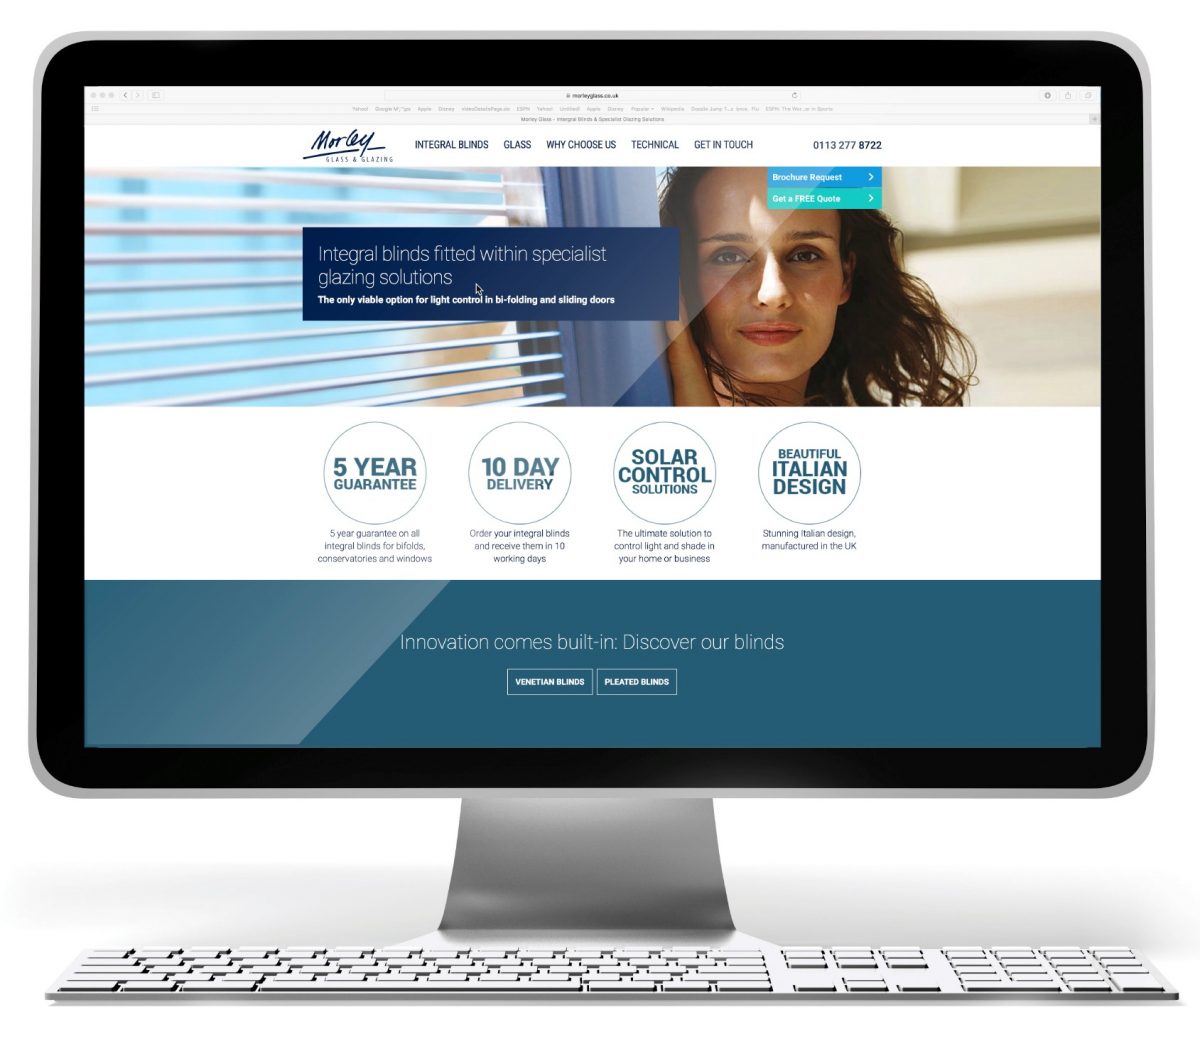 Morley website strengthens its commitment to customers